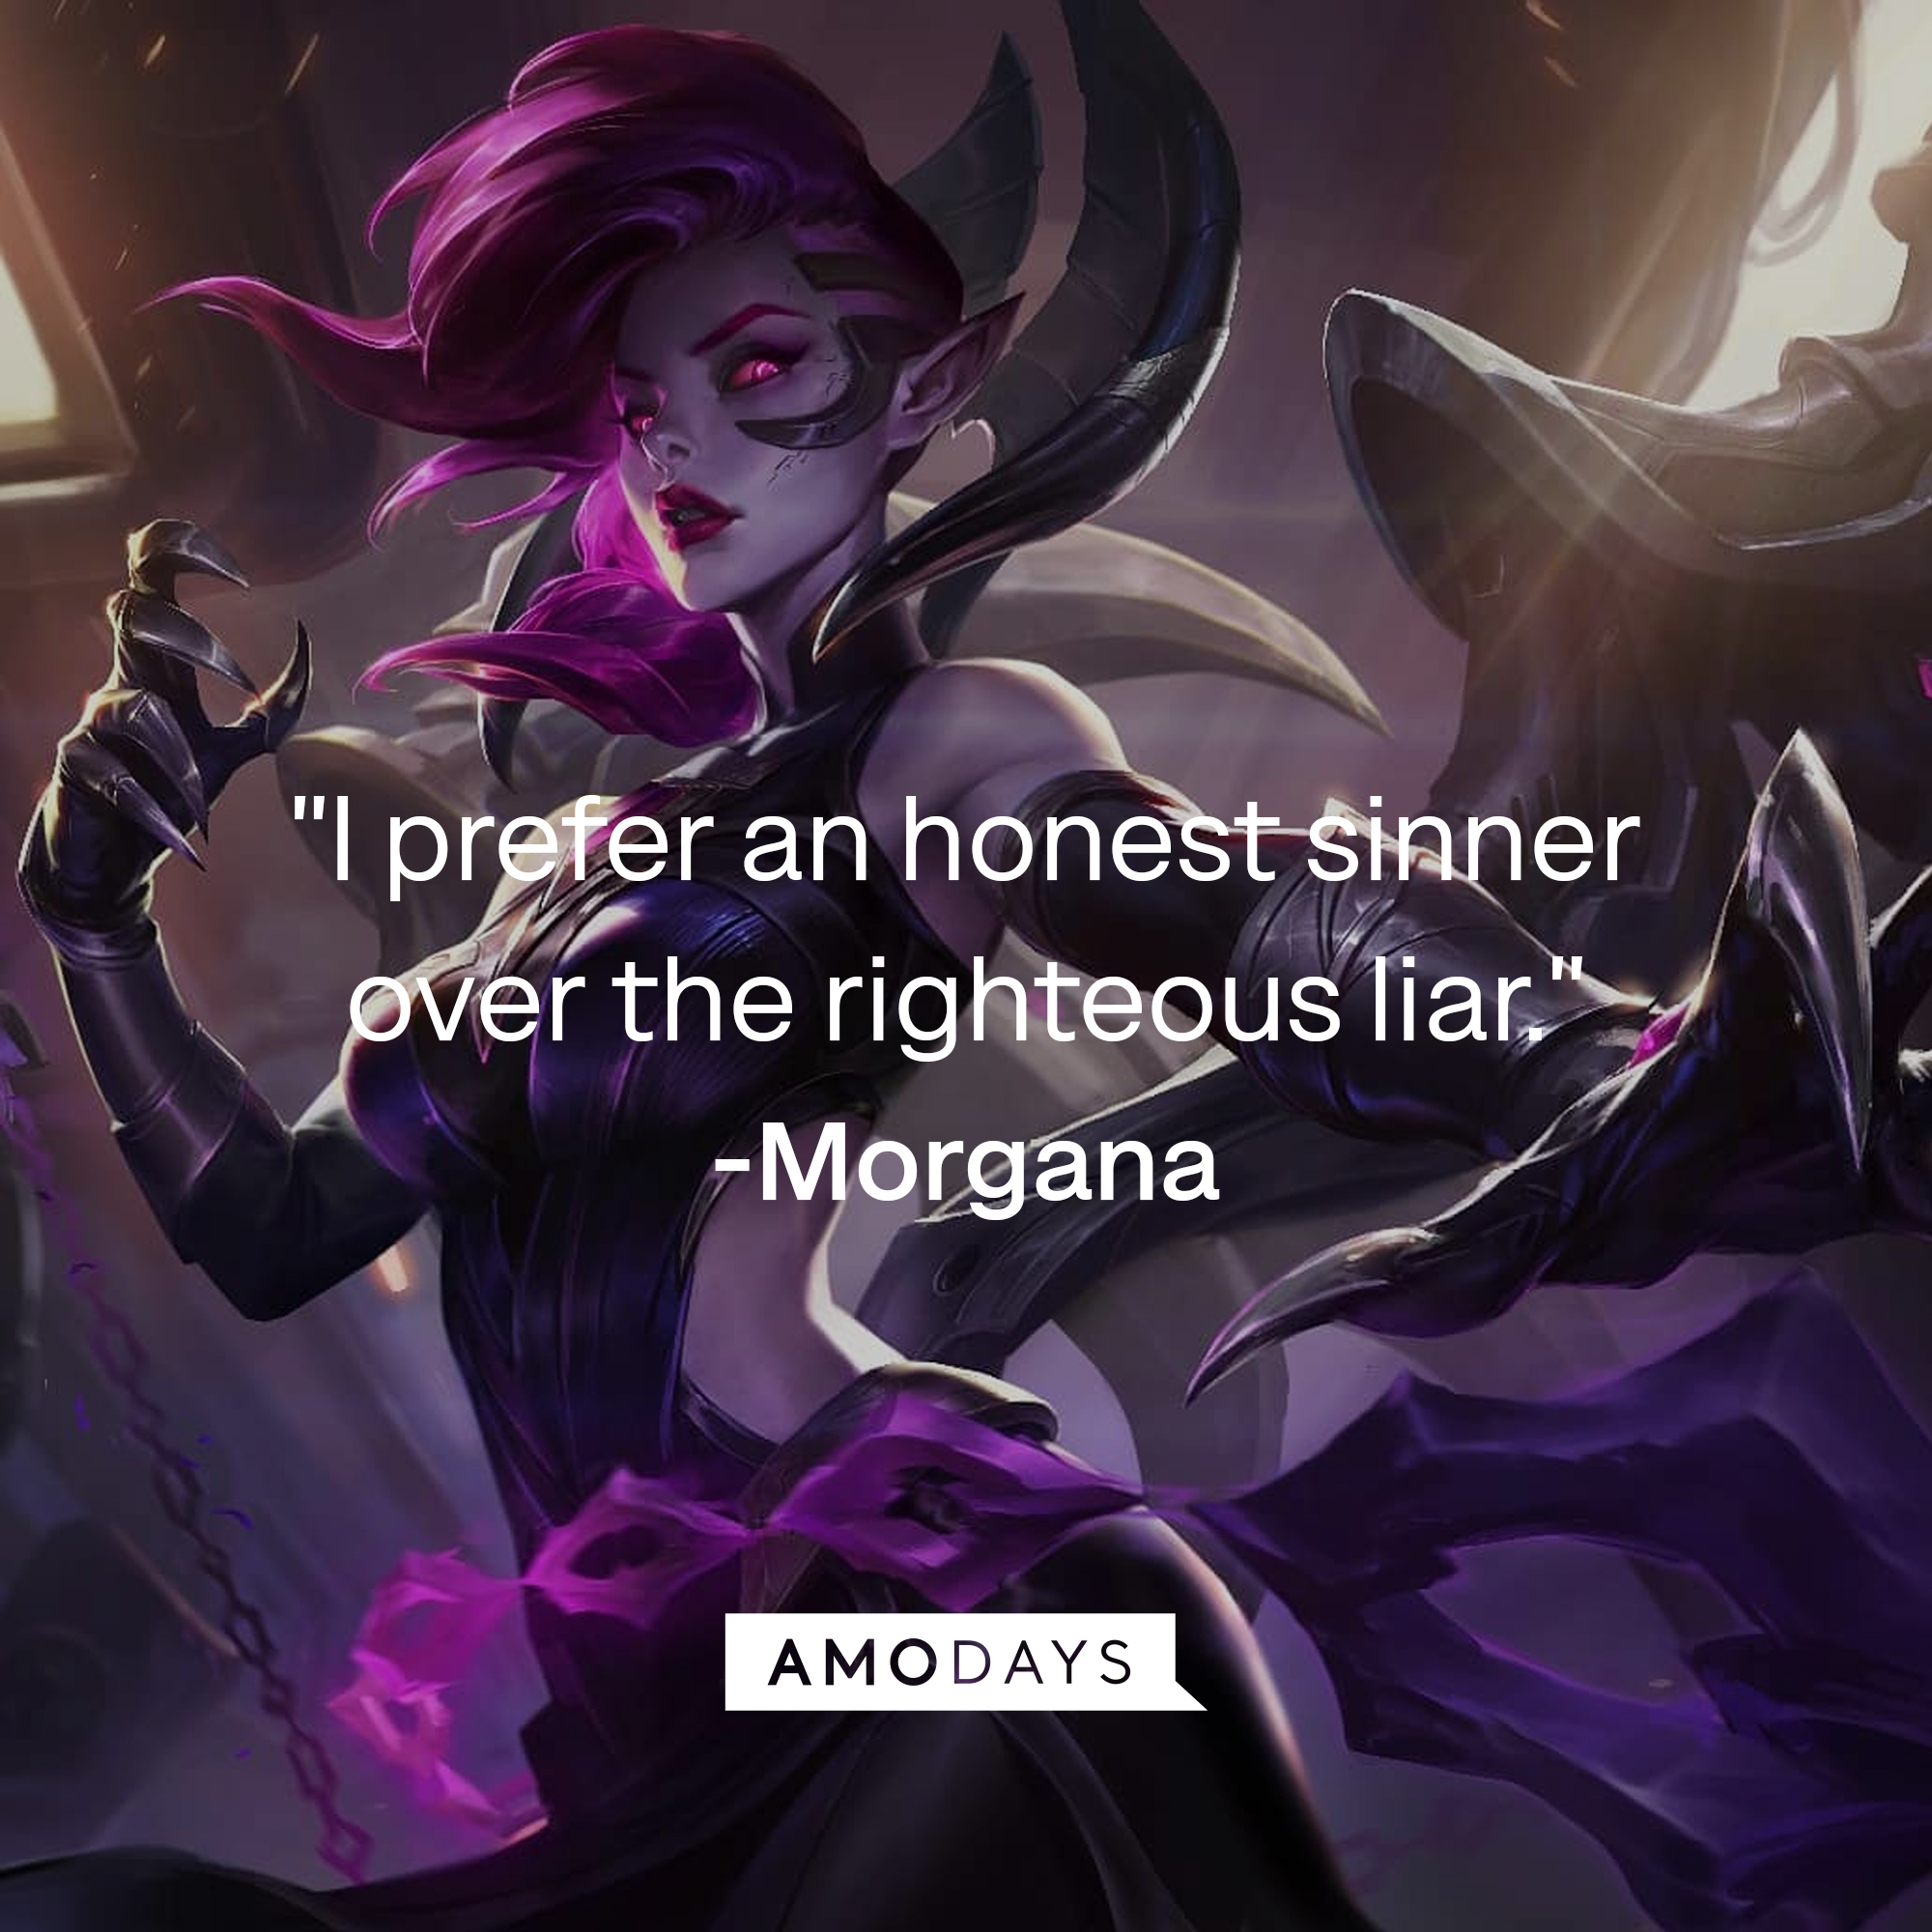 An image of Morgana, with her quote: "I prefer an honest sinner over the righteous liar." | Source: Facebook.com/leagueoflegends